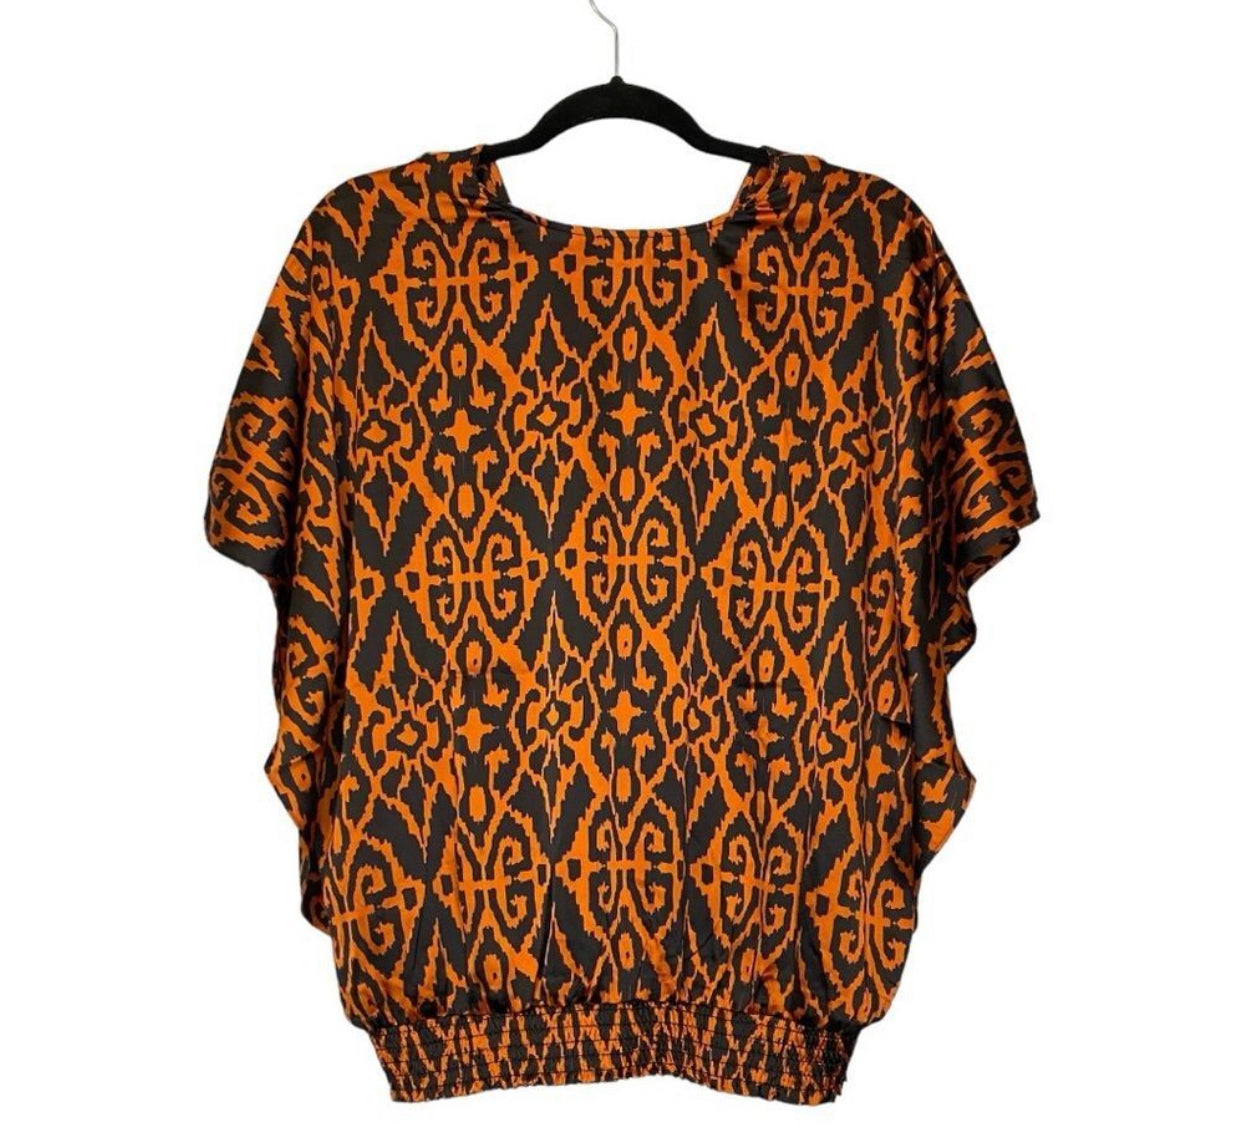 Chico’s Satin Ikat Top - Size XL